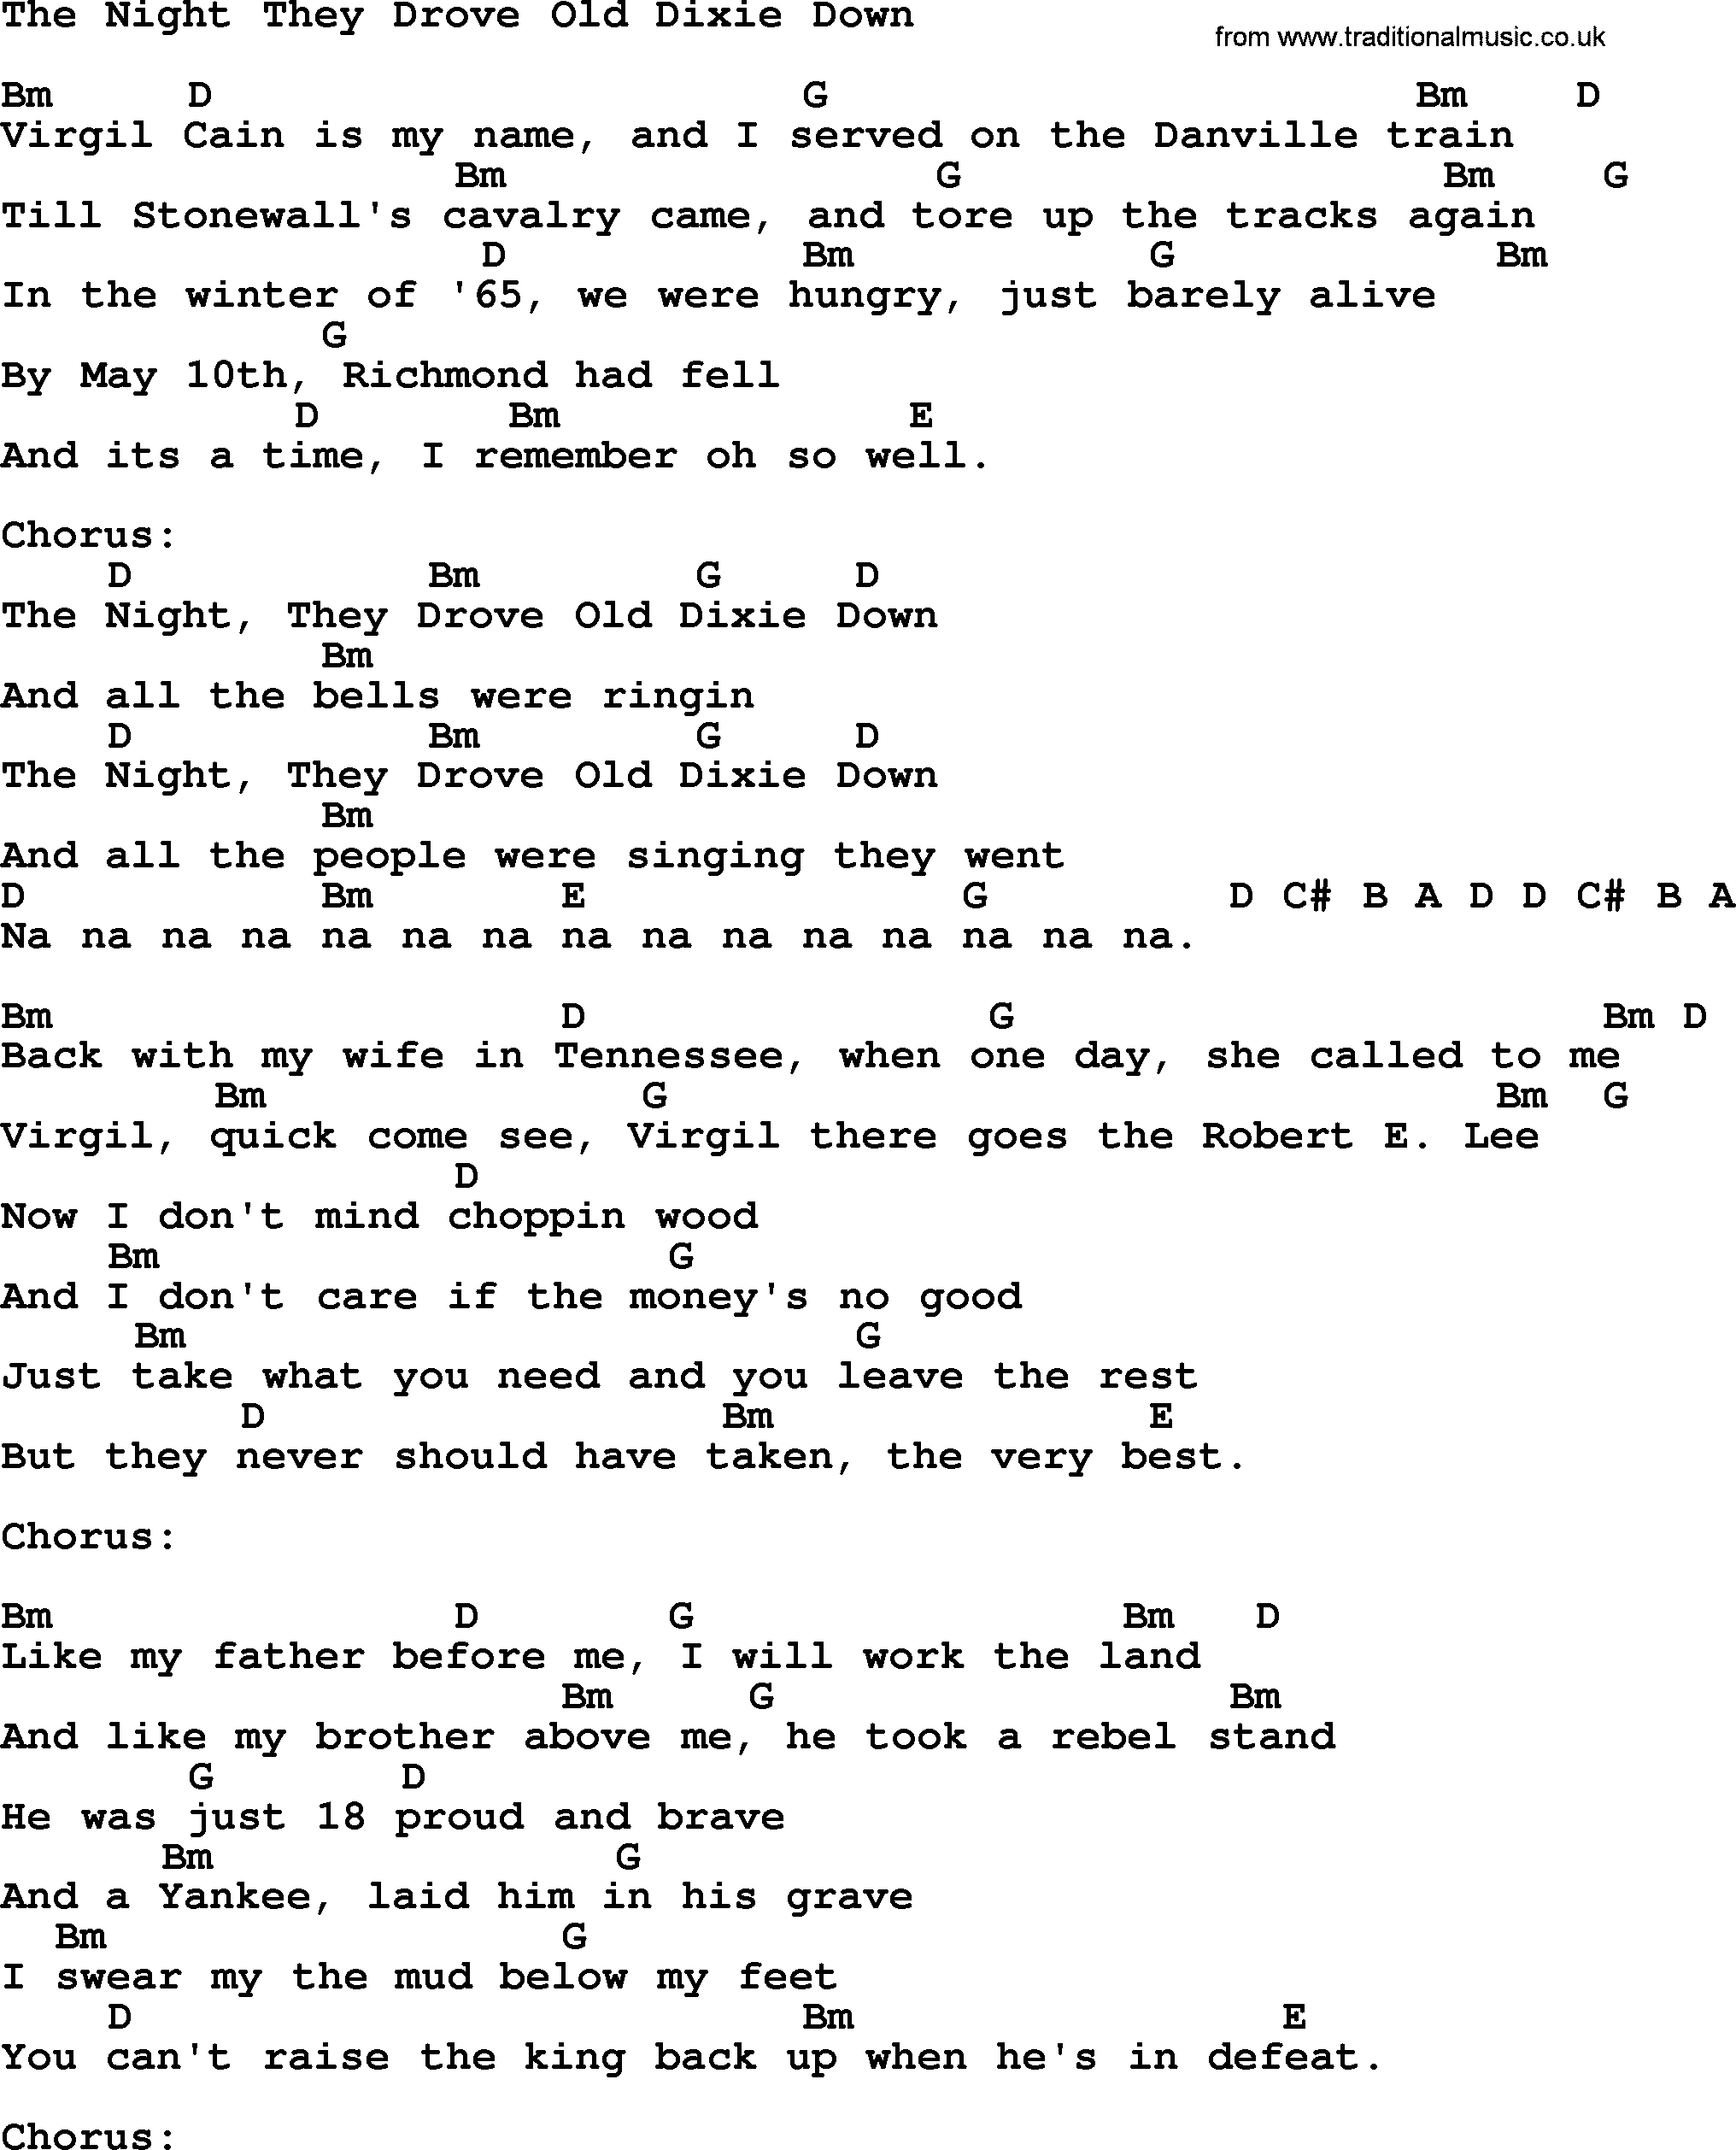 Johnny Cash song The Night They Drove Old Dixie Down, lyrics and chords